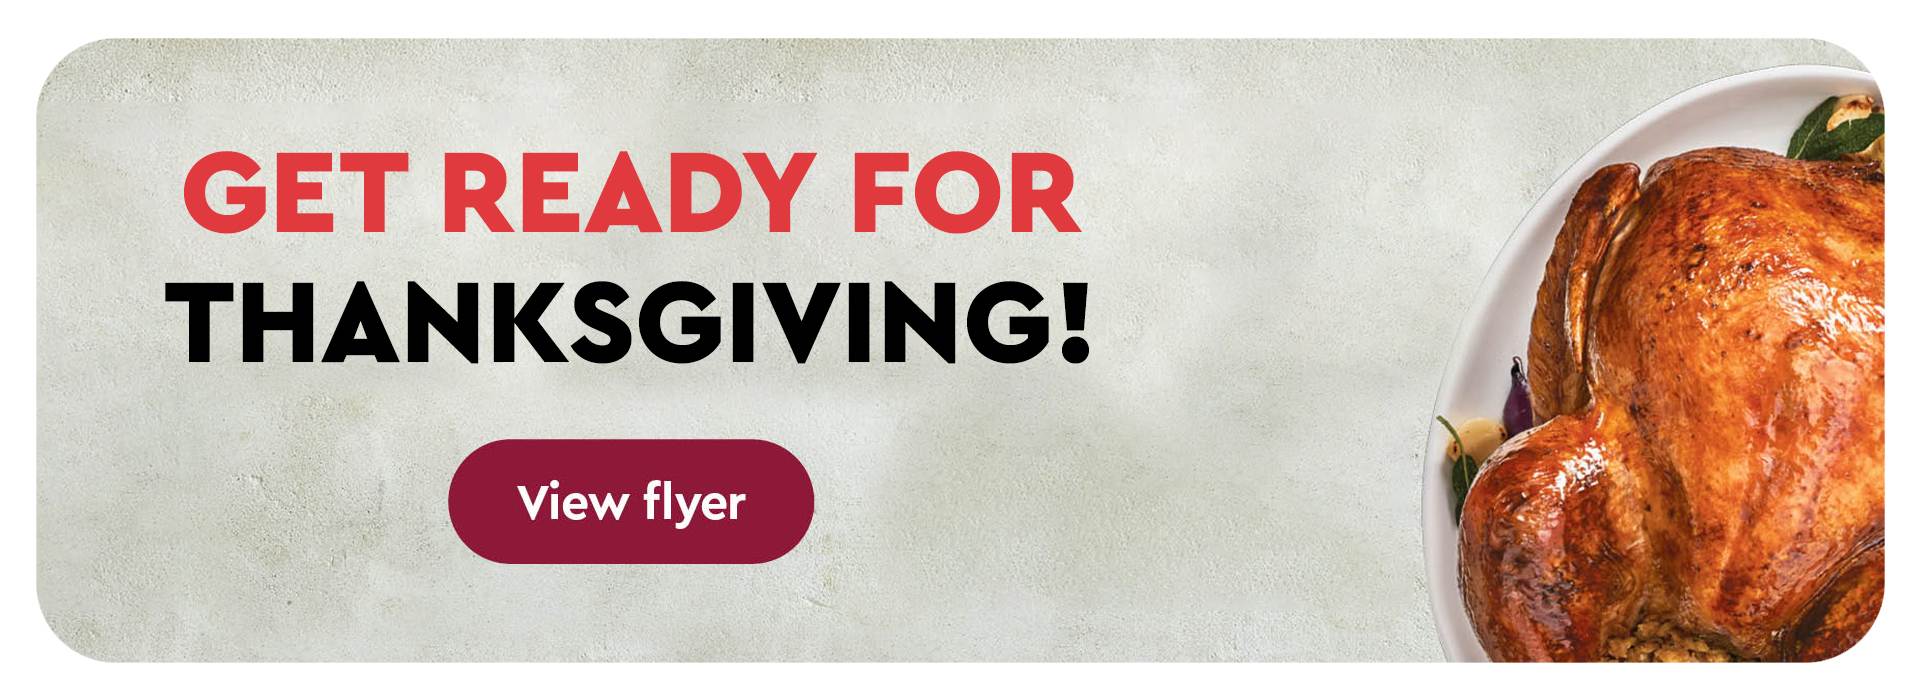 Text Reading 'Get ready for Thanksgiving. 'View flyer' by clicking on the button given below.'